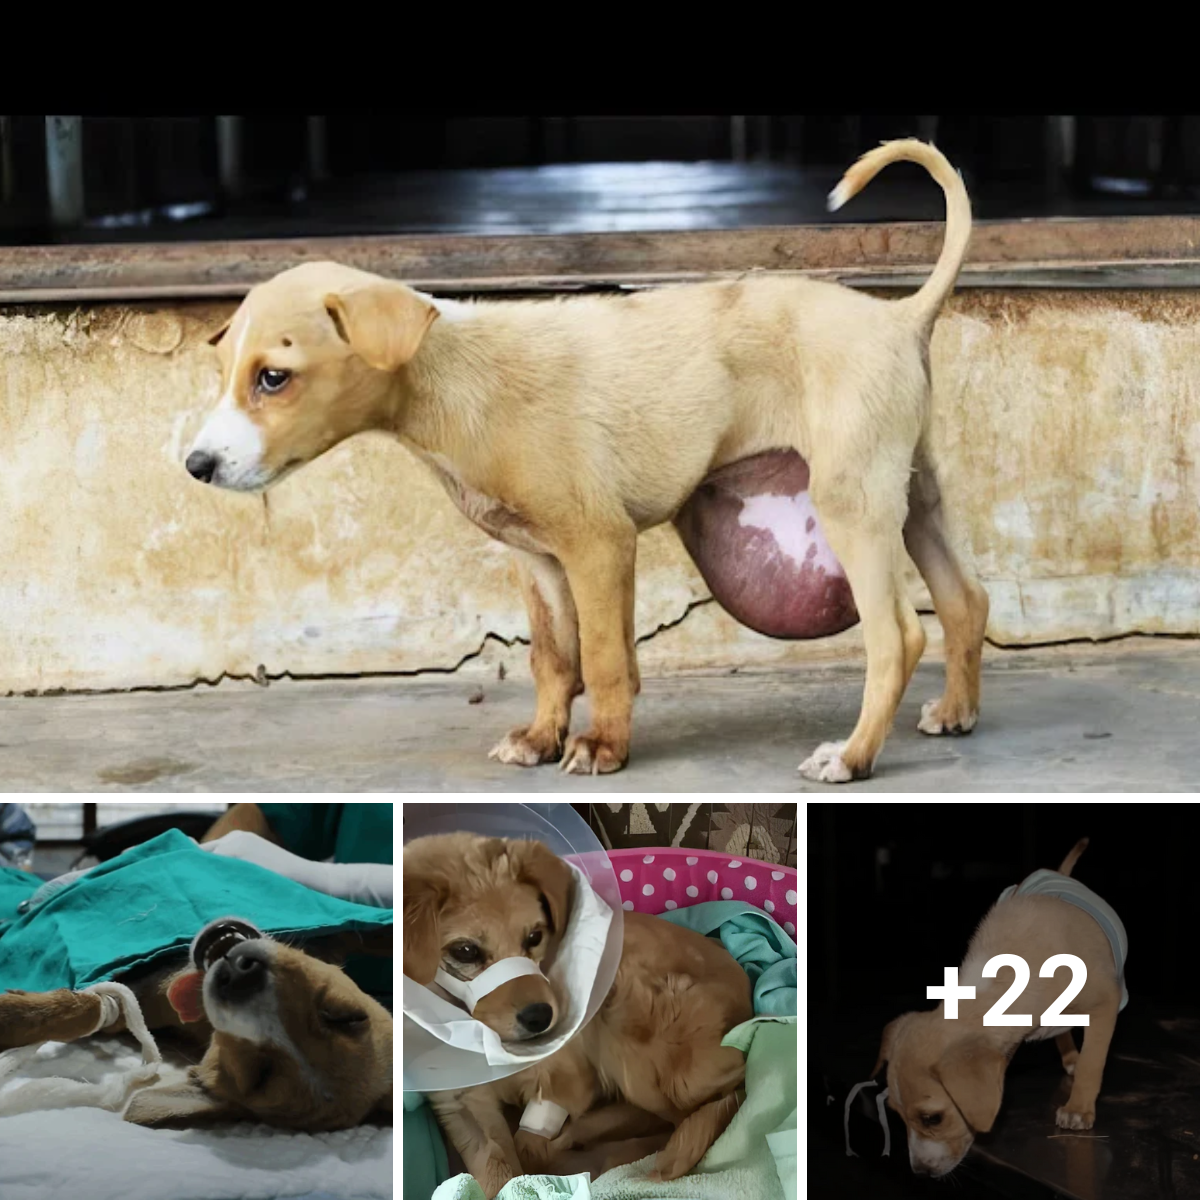 the incredible recovery of a puppy with a massive tumor under its tummy, and their best wishes for the puppy’s future.